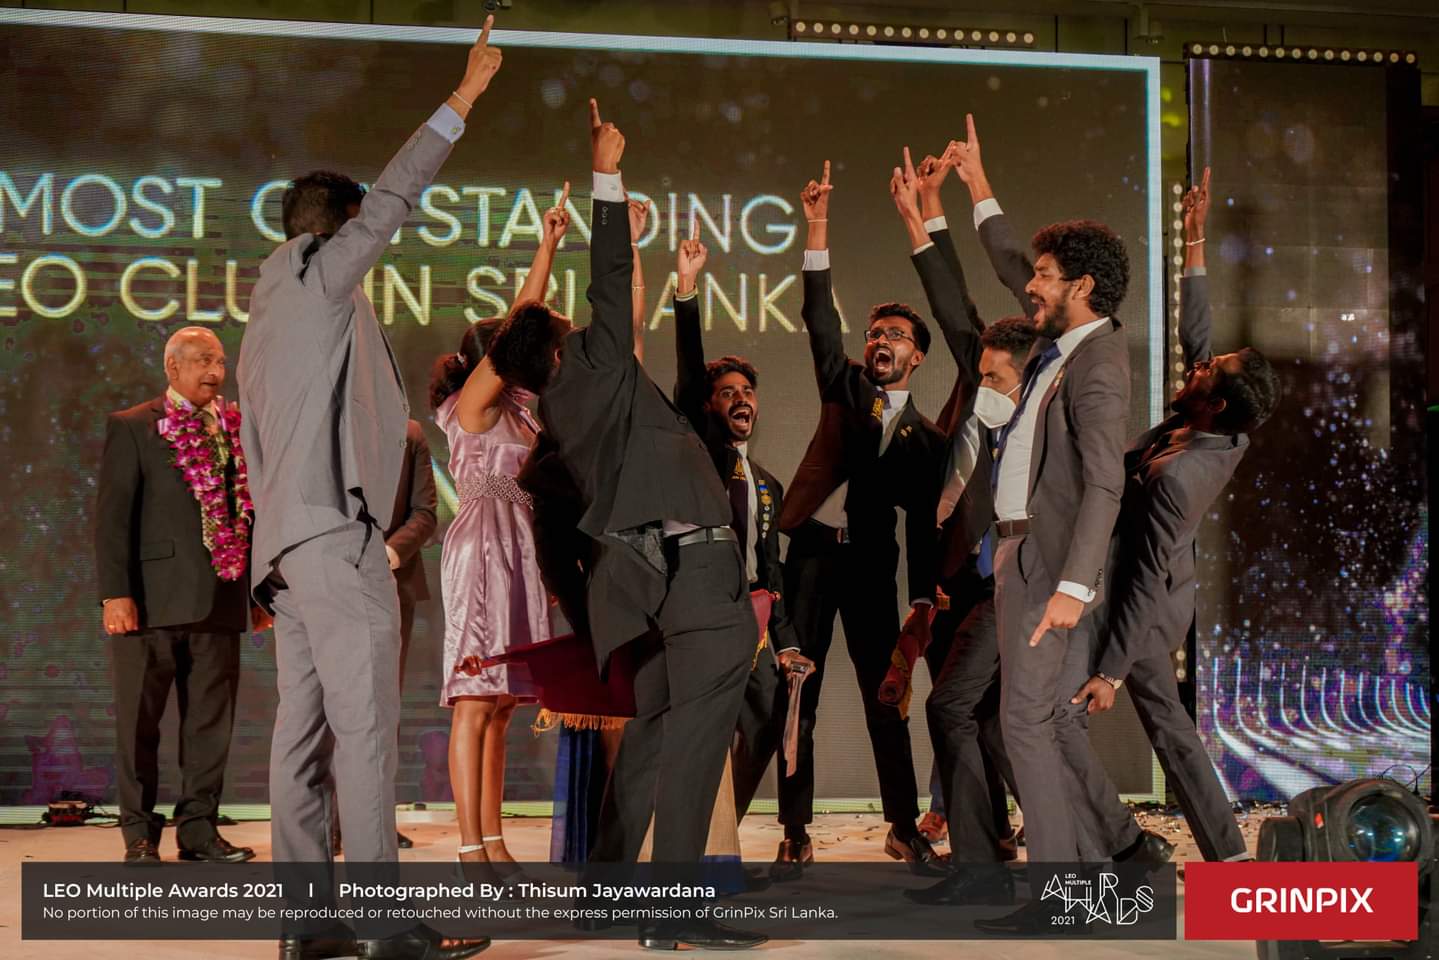 Leo Club of University of Moratuwa was awarded the Most Outstanding Leo club in Sri  Lanka for the year 2020/2021